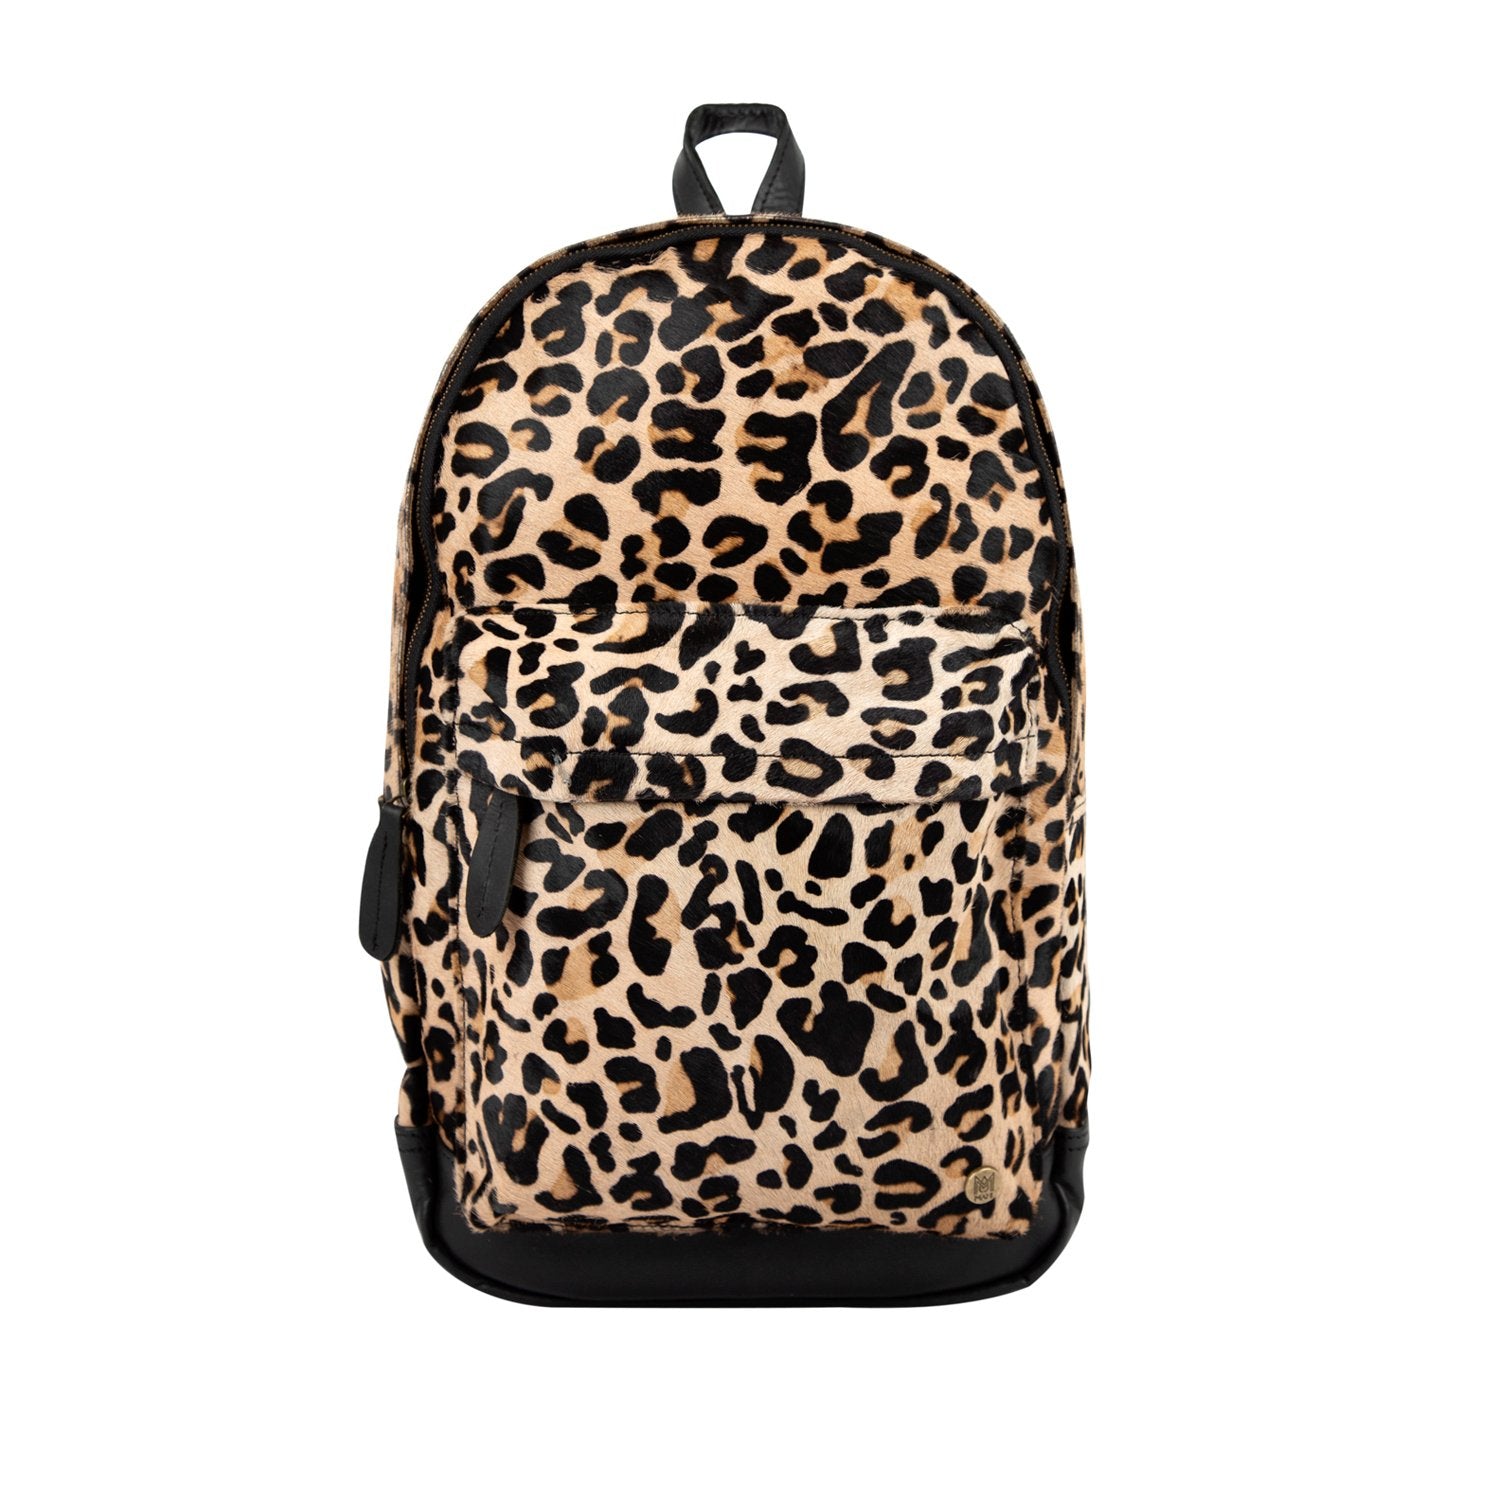 Leopard Print Backpack; Cowhide Leather Backpack For Work or School ...